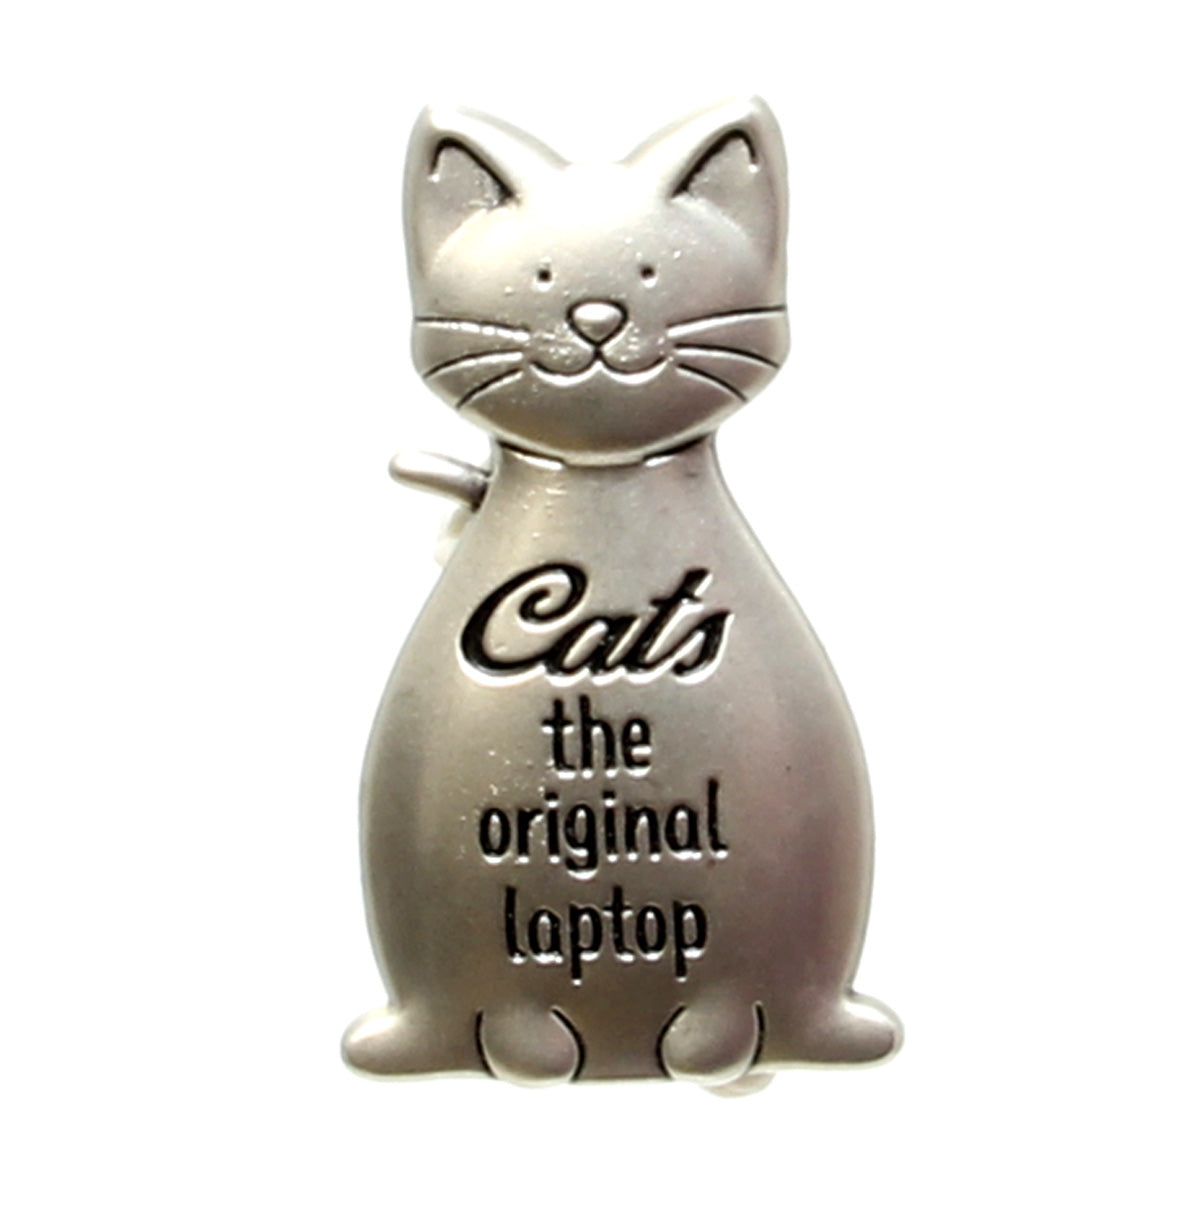 Life Is Better With A Cat Charm, multiple designs